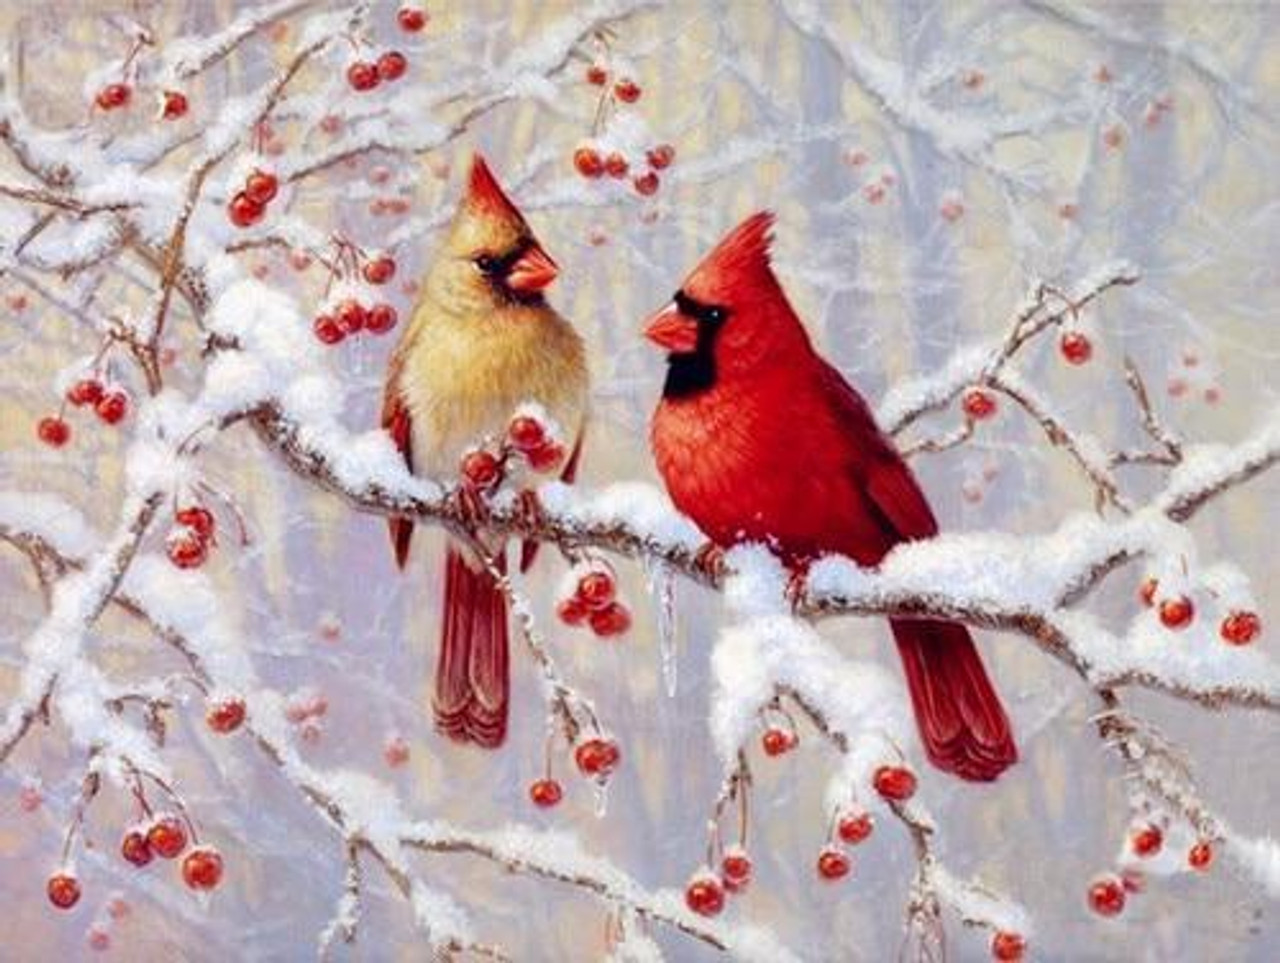 Winter Cardinals Diamond Painting Kit with Free Shipping – 5D